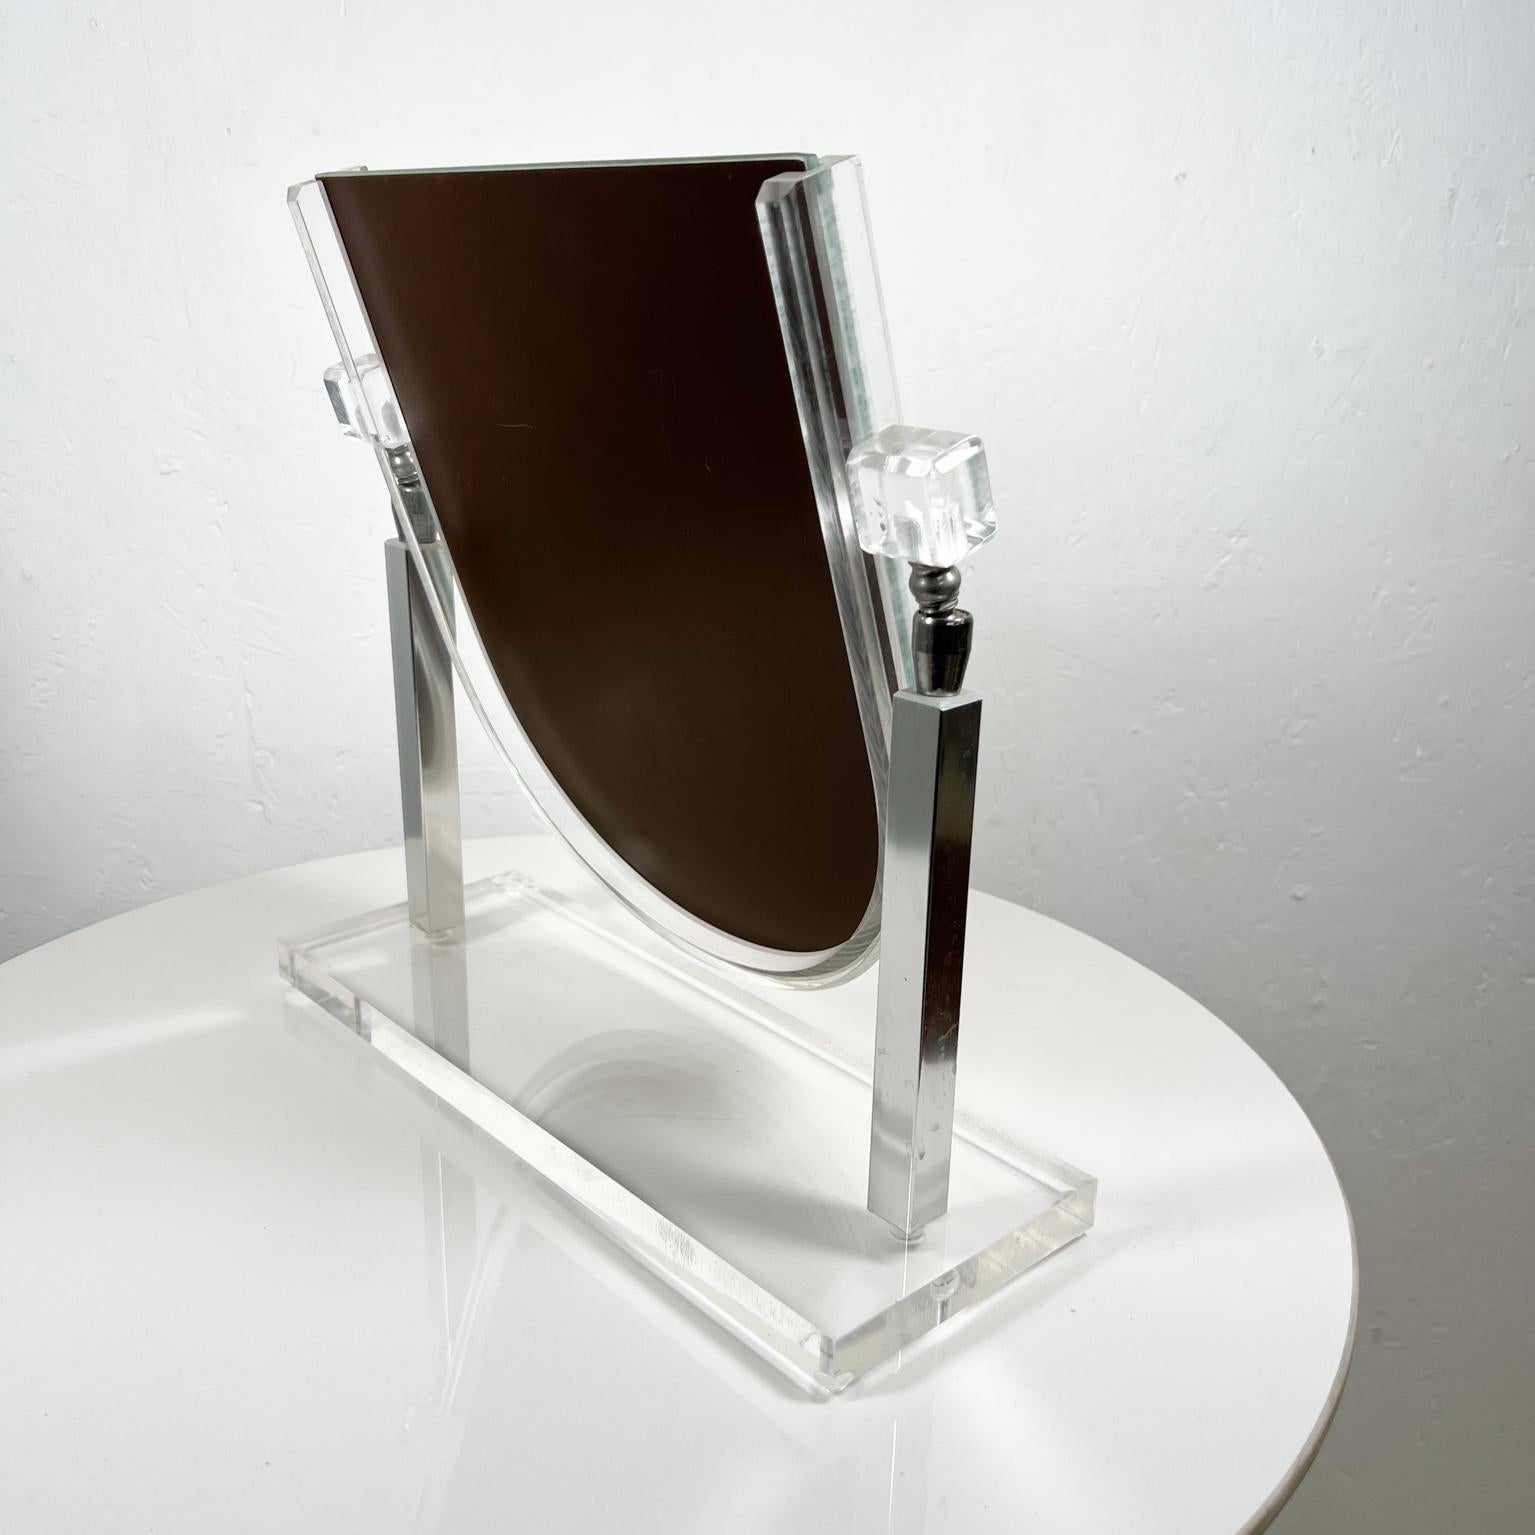 1970s Modernist Lucite Chrome Table Vanity Mirror  For Sale 4